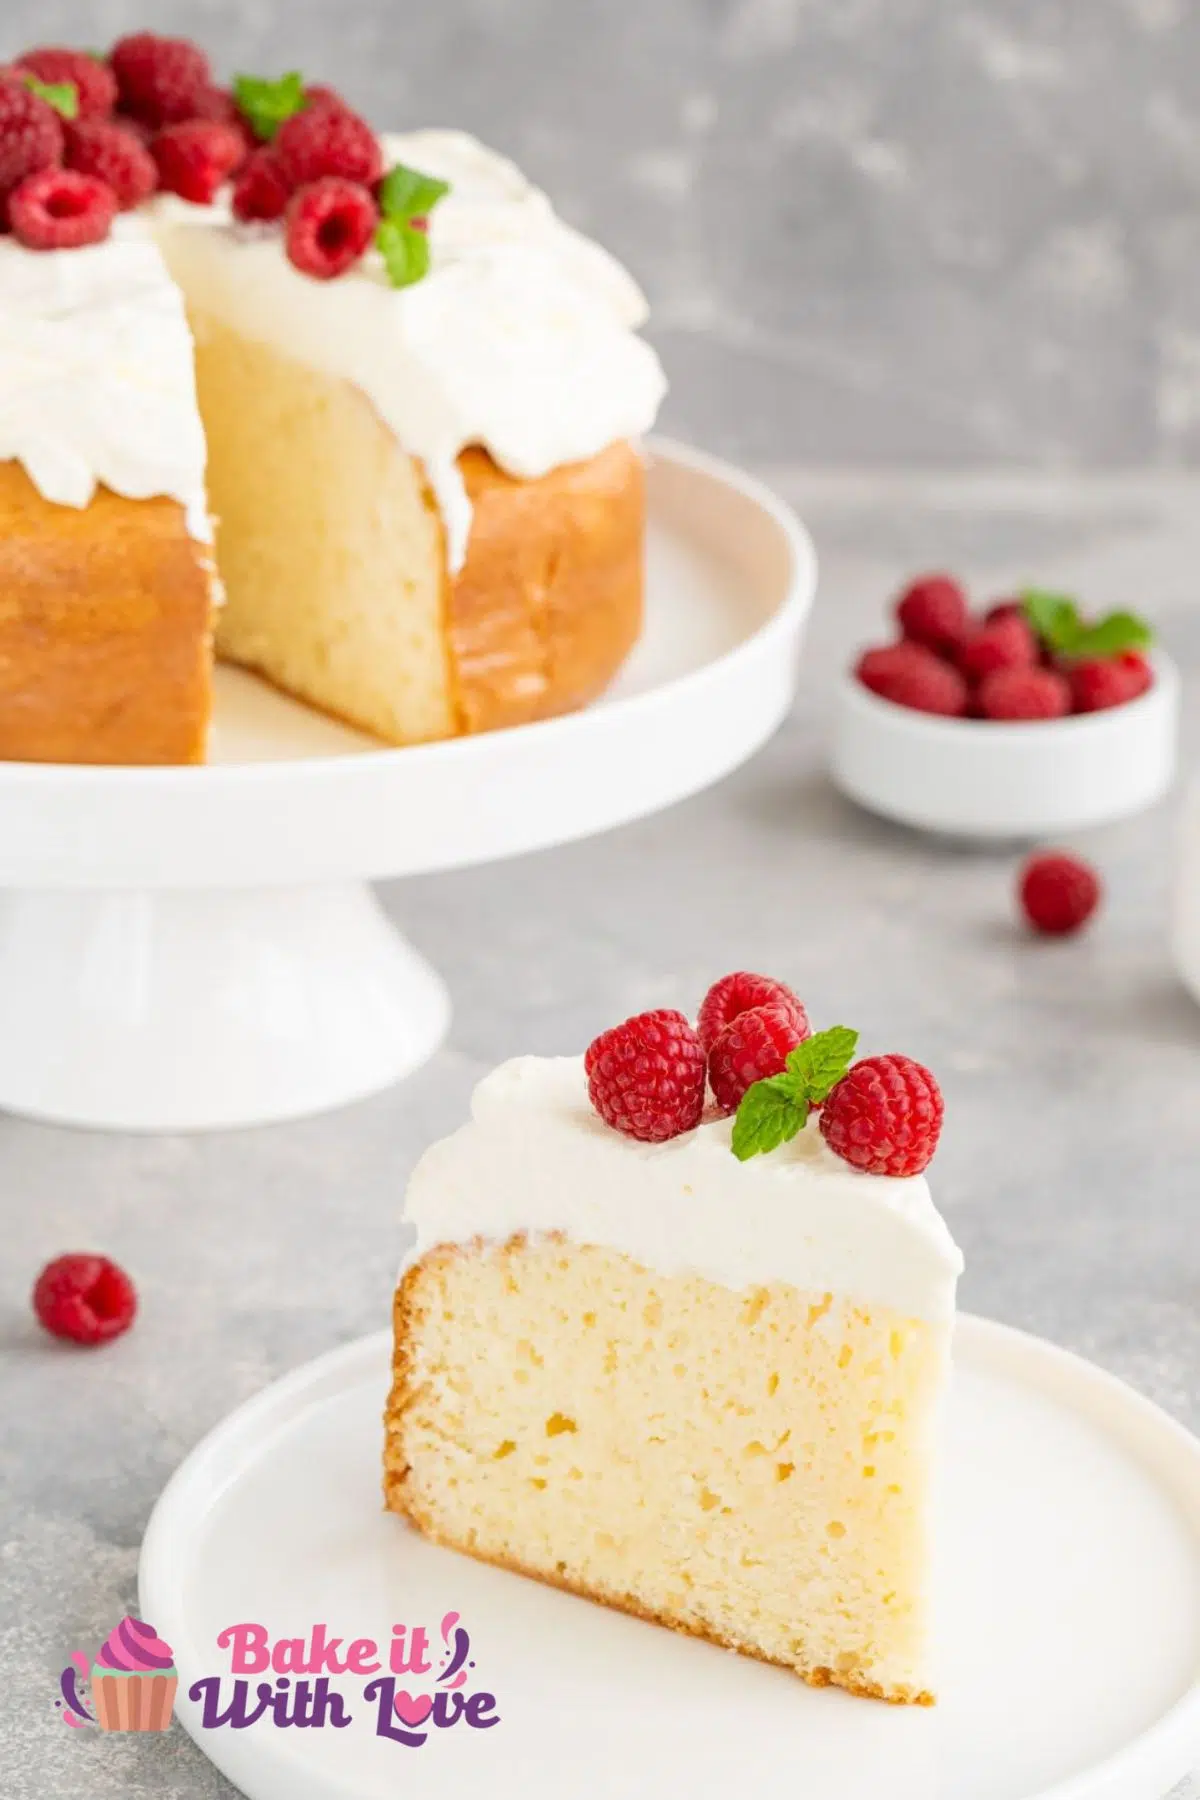 Tall image of the tres leches cake on cake stand with a slice pulled out and plated.